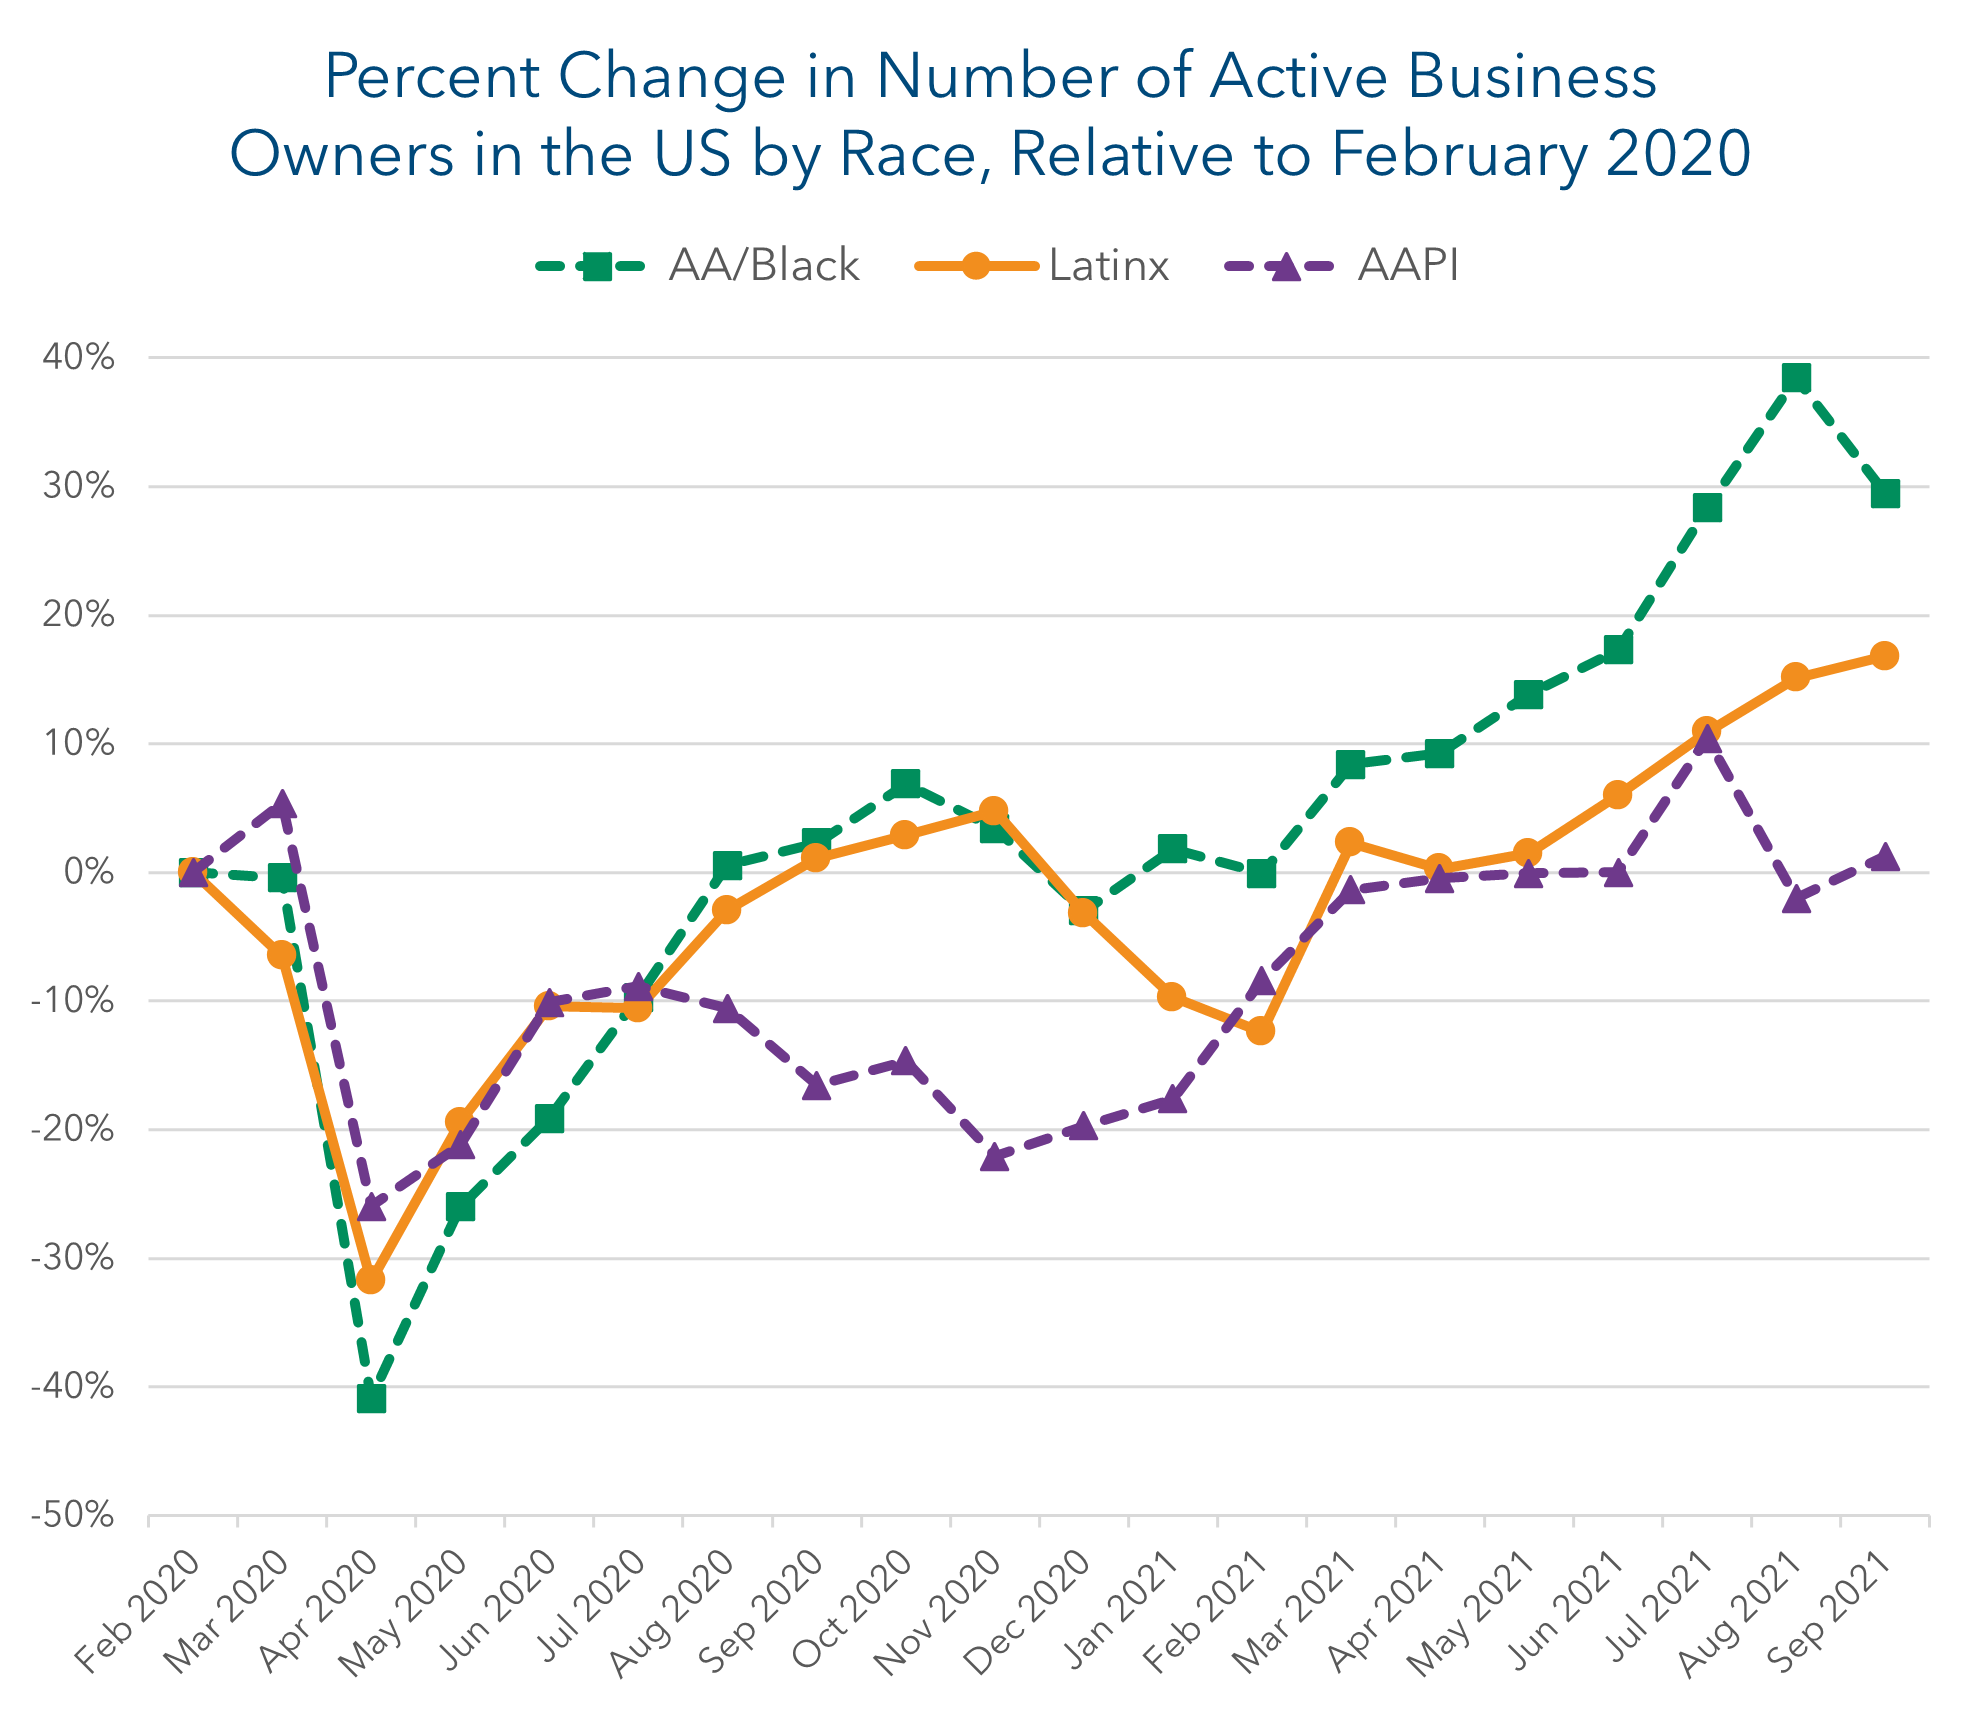 Chart showing the Percent Change in Number of Active Business Owners in the US by Race, Relative to February 2020. All three groups (African American/Black, Latinx, and Asian) drop steeply from March to April 2020 but rebound quickly over the following months. There is a general increase through September 2021, punctuated by occasional dips. By April 2021, all three groups have recovered to pre-pandemic levels.